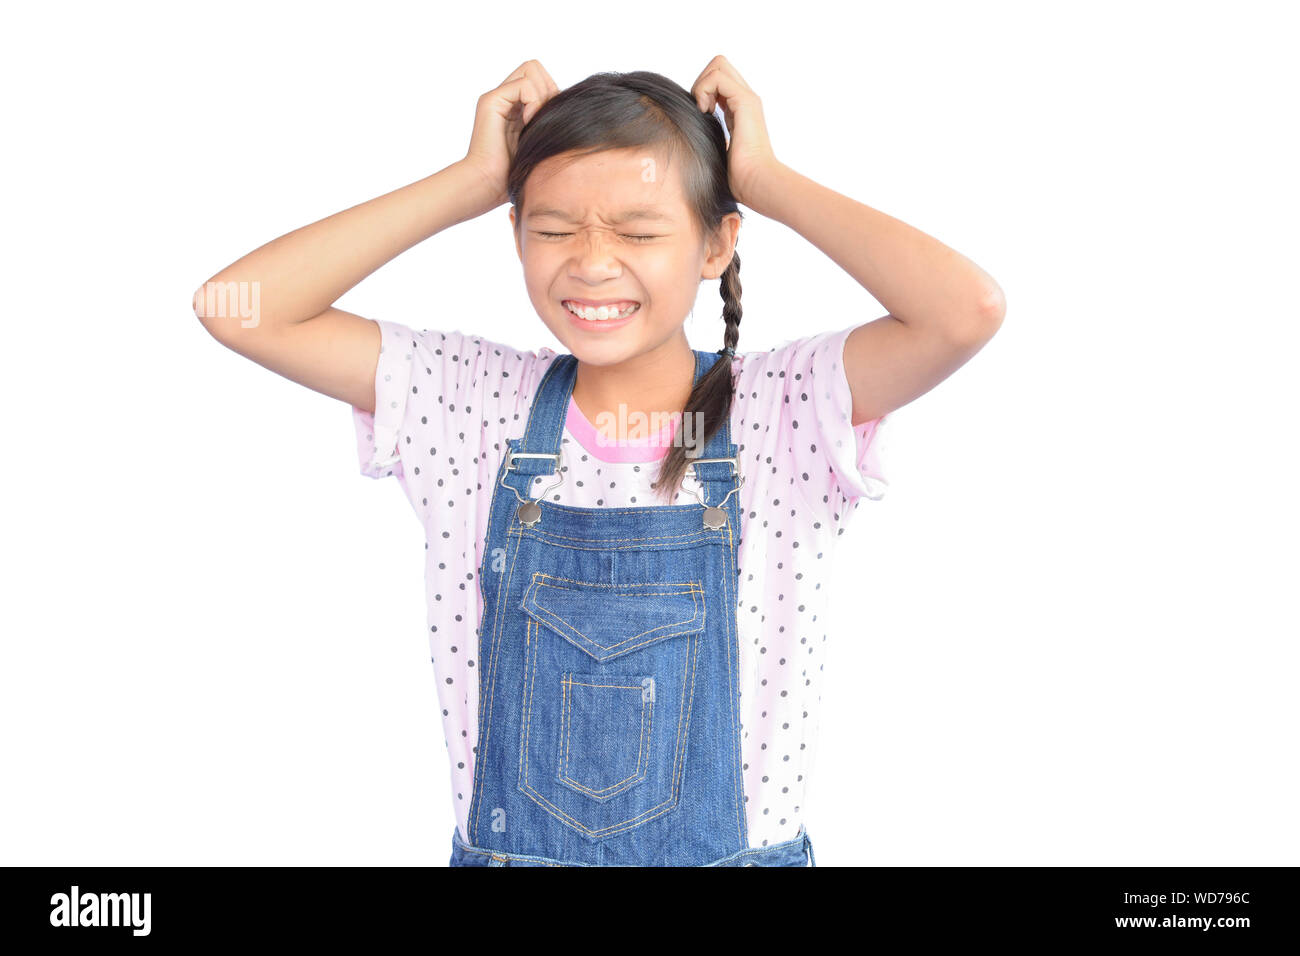 Frustrated Girl Standing Against White Background Stock Photo